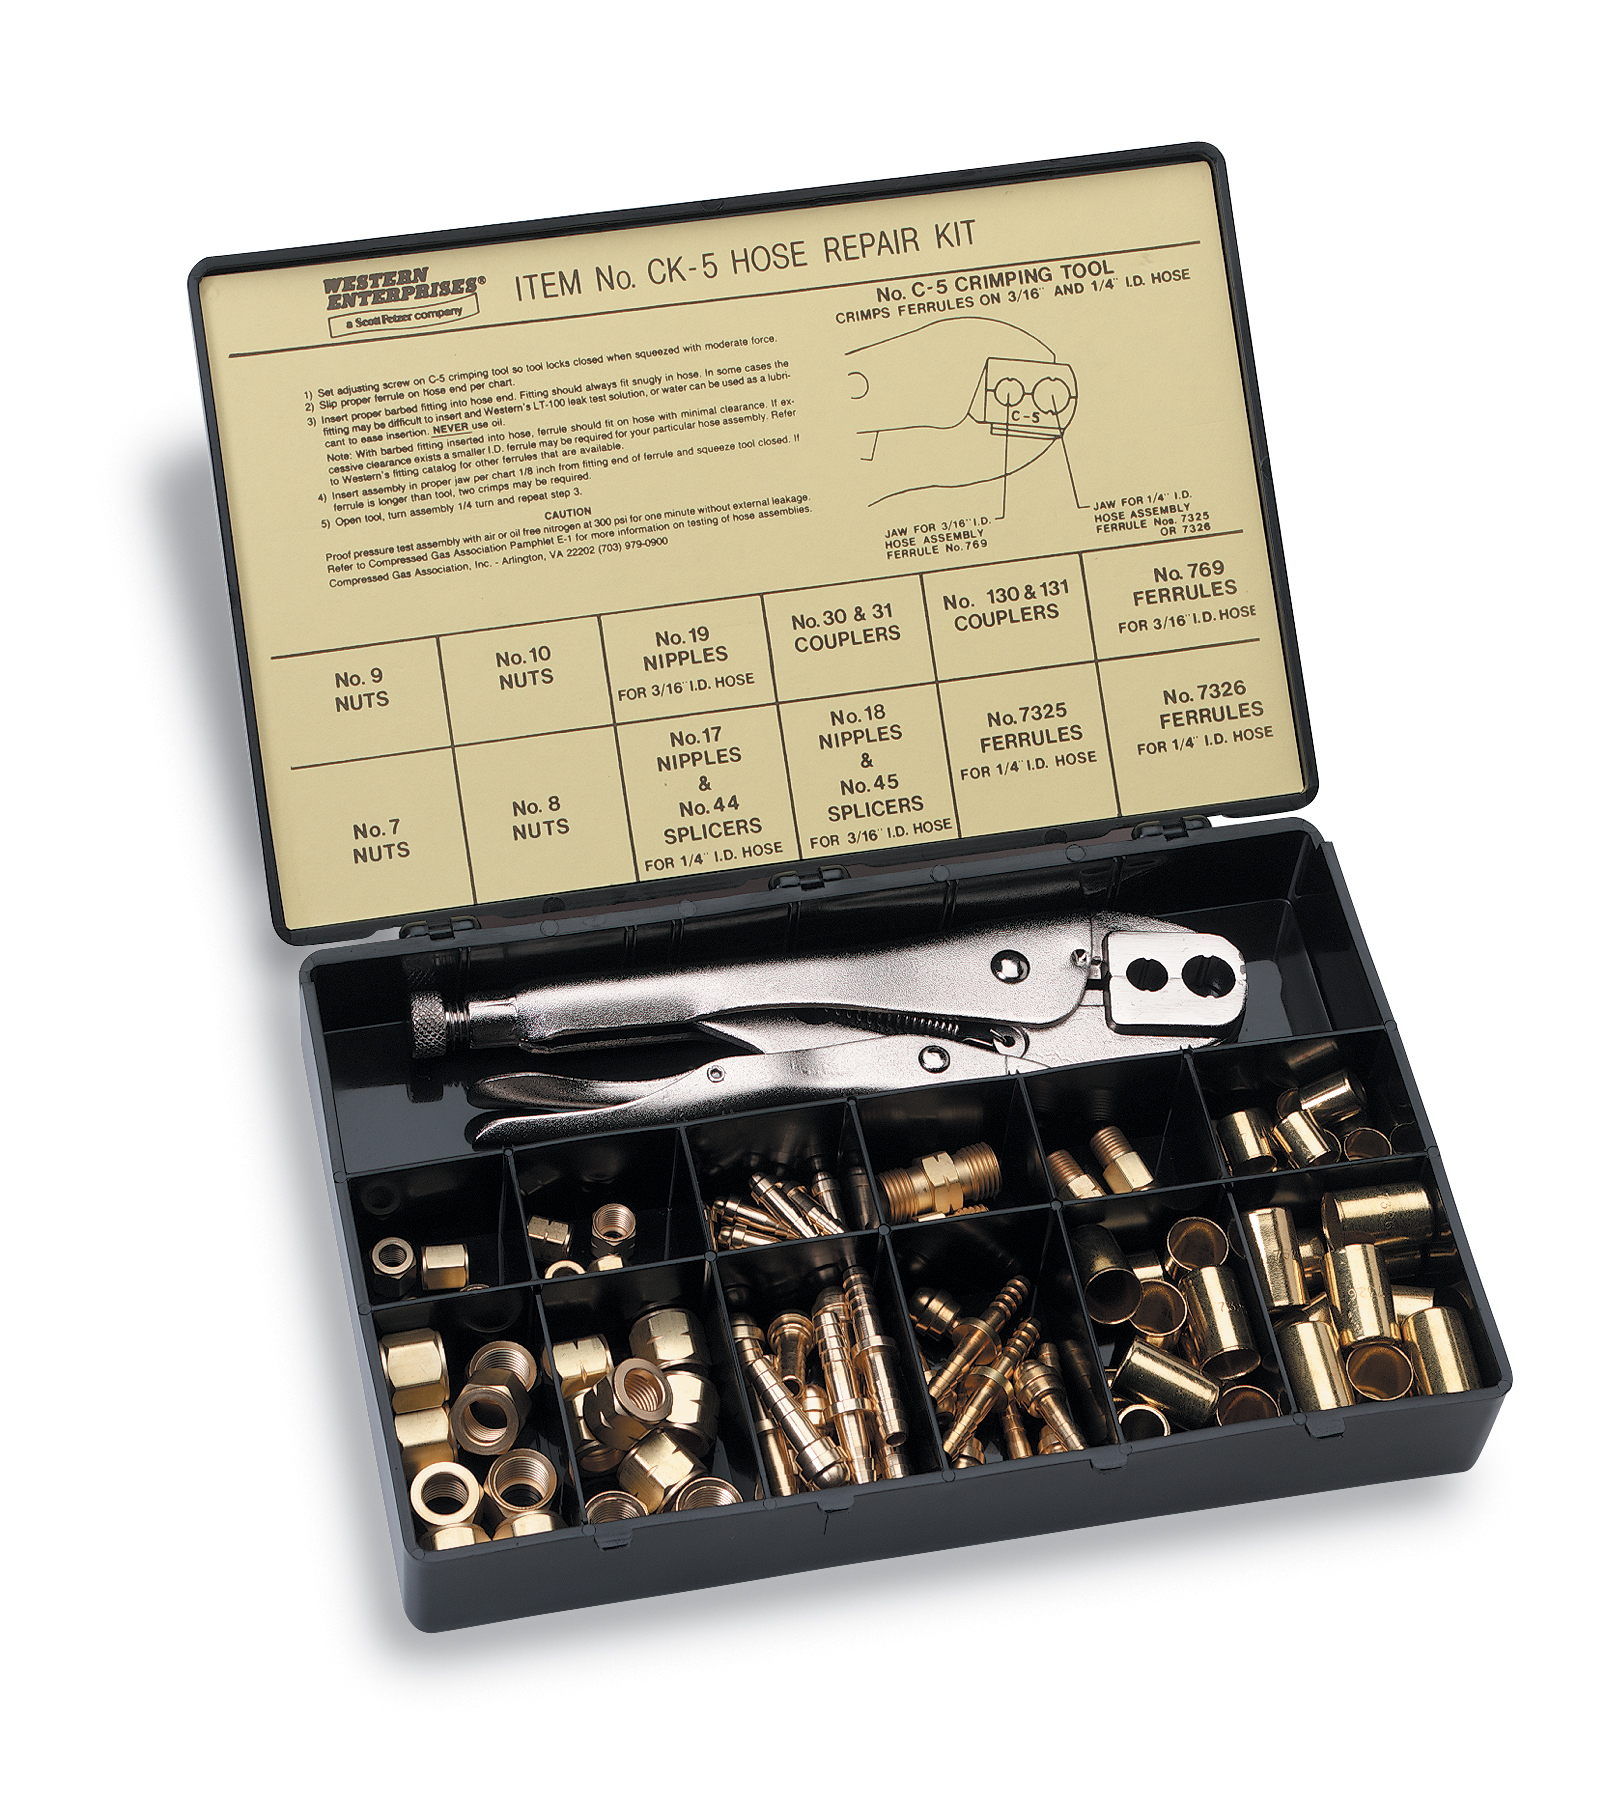 Western Enterprises®  for 3/16", 1/4"ID Hose.  Includes C-5 crimping tool and A|B size fittings.